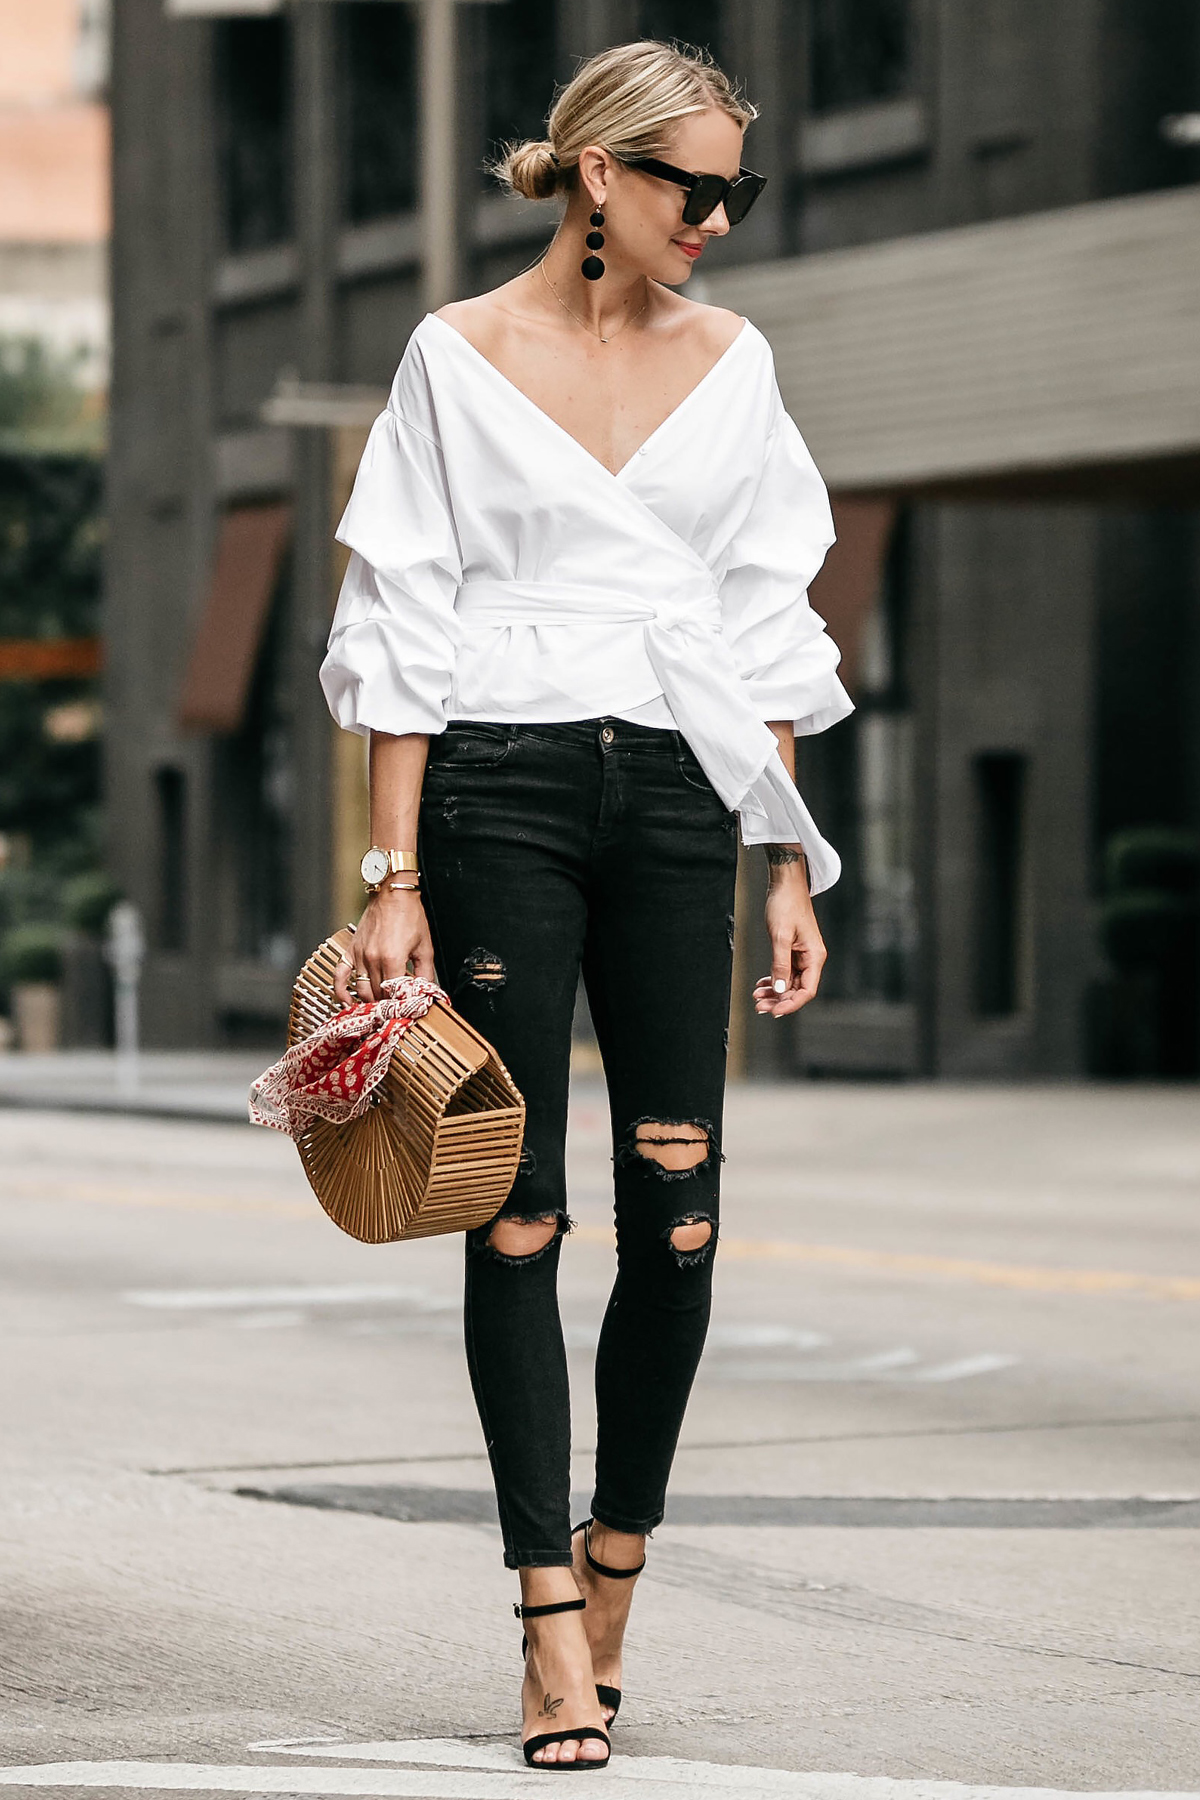 Blonde Woman Wearing Club Monaco Ruffle Sleeve Wrap Top Cult Gaia Ark Bag Red Bandana Black Ripped Skinny Jeans Street Style Outfit